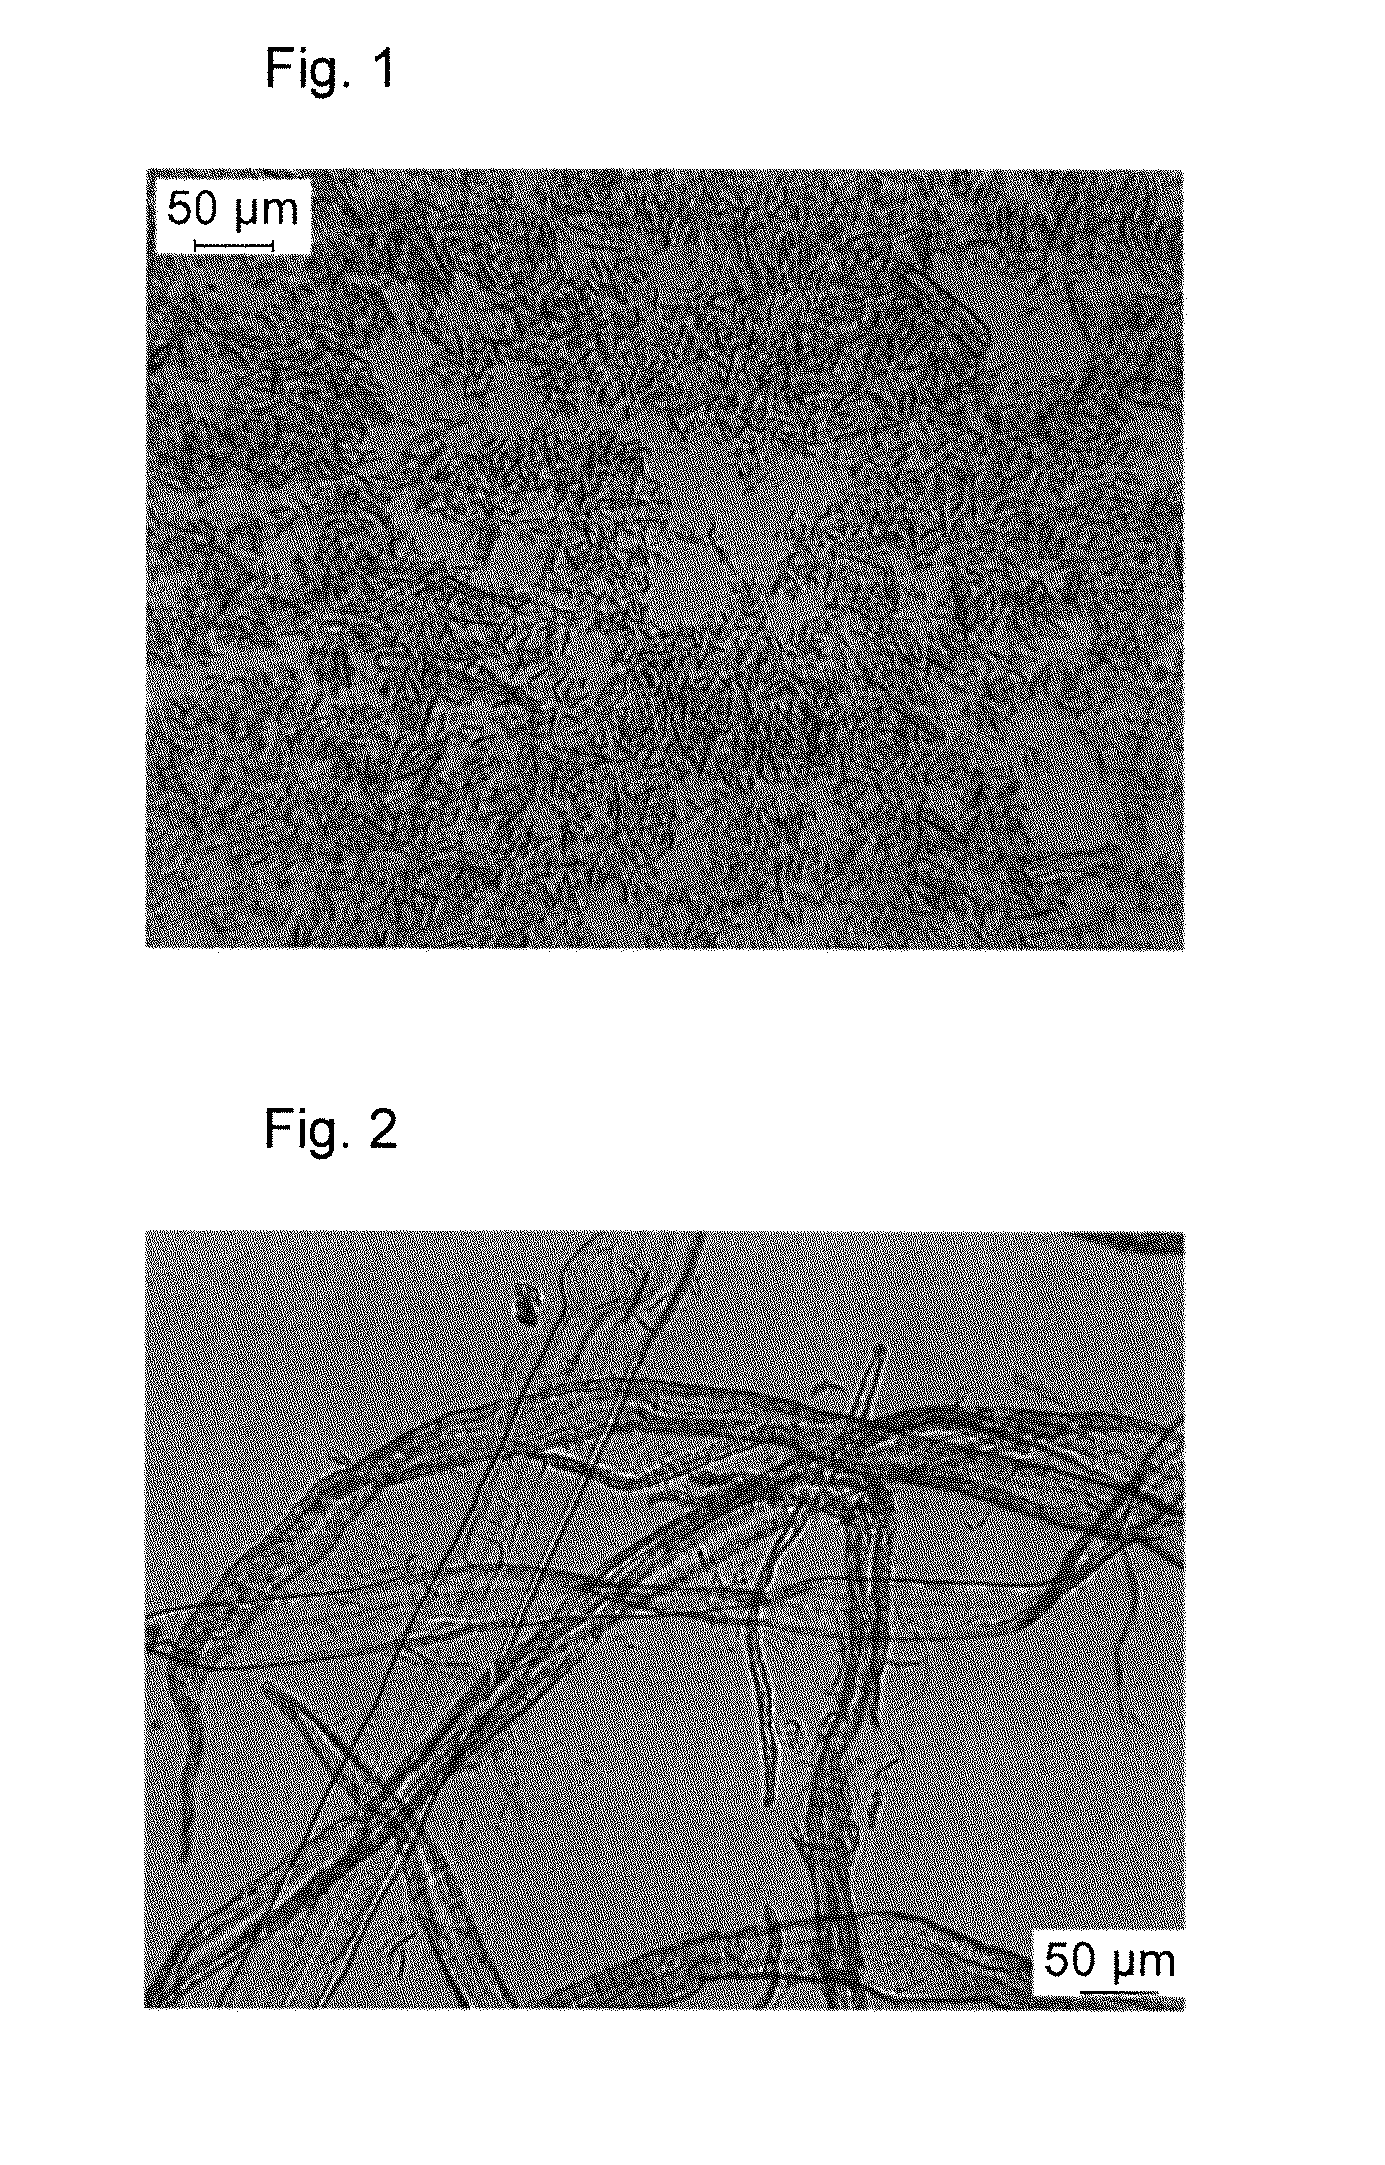 Process for the production of microfibrillated cellulose and produced microfibrillated cellulose